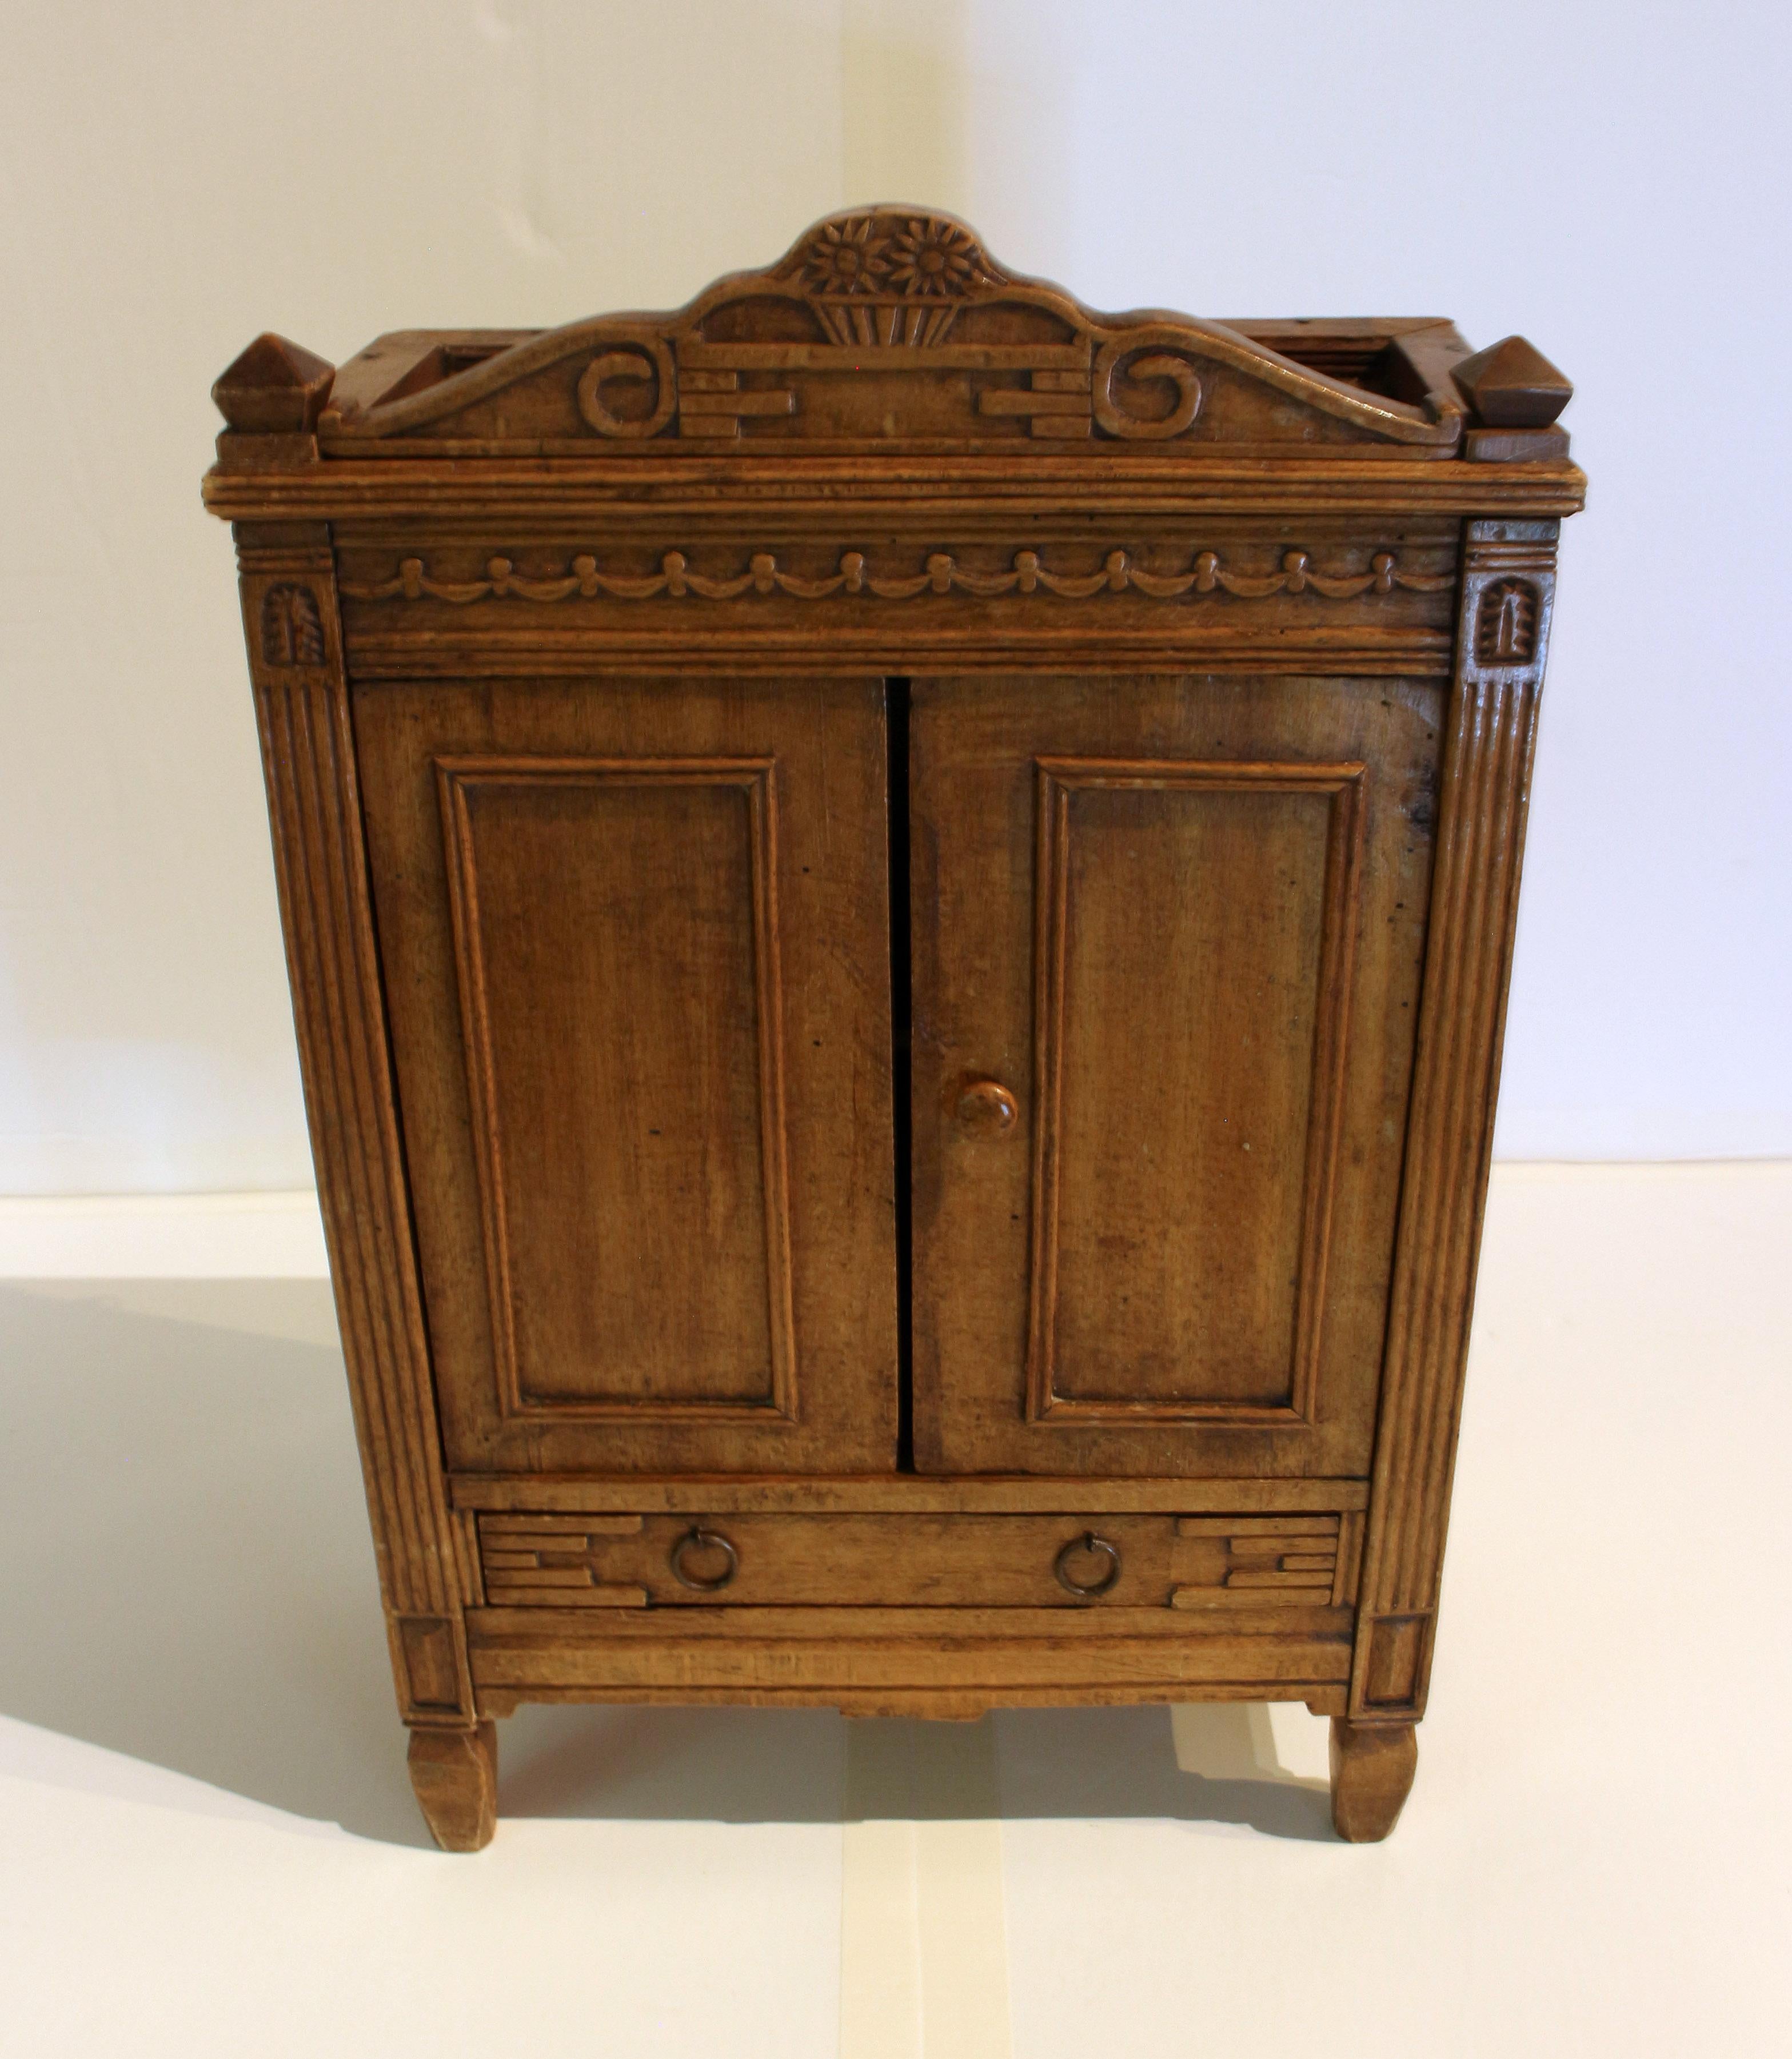 Mid-late 19th century miniature armoire, country French. Charming example, wired at the back to hang or to set on another piece. Cherry & poplar woods. Shaped crest carved with sunflowers in a basket, carved pilasters flank the doors (each now